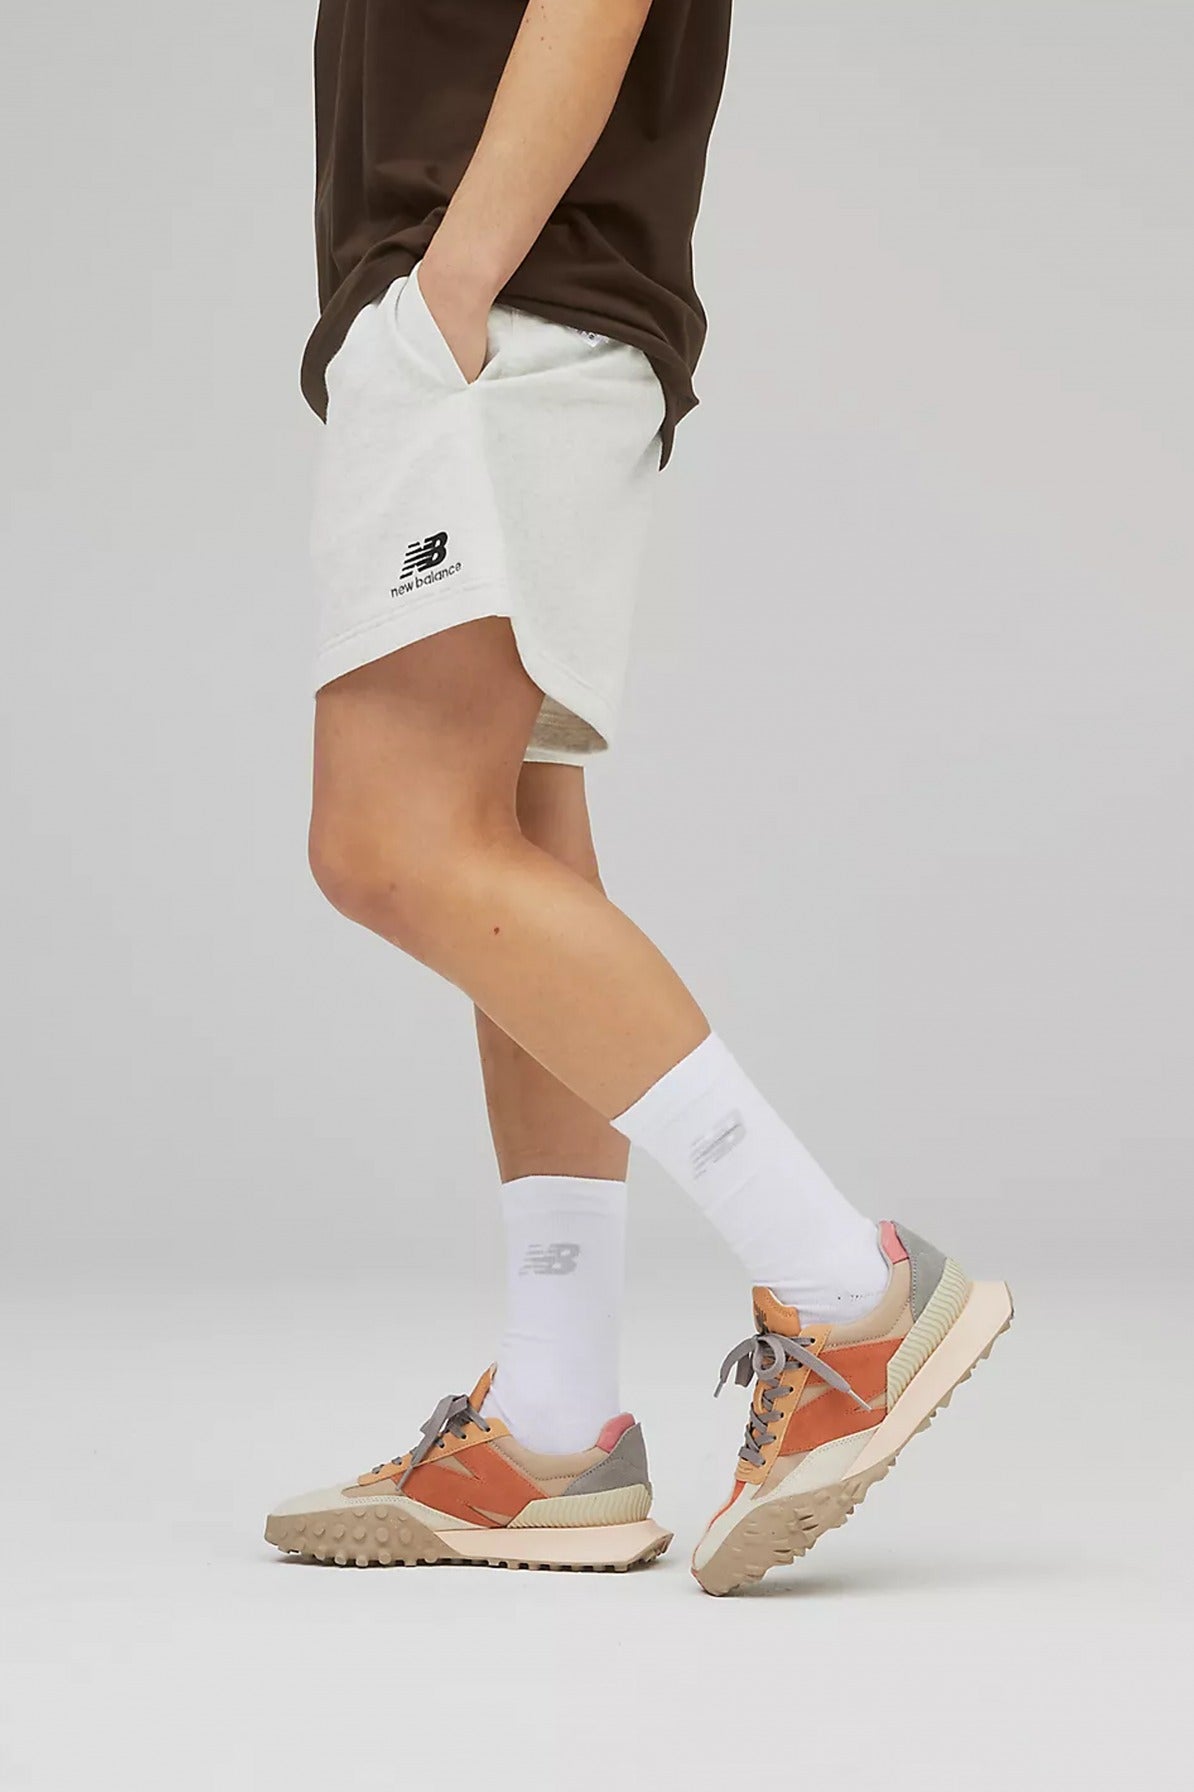 NEW BALANCE UNI-SSENTIALS FRENCH TERRY SHORT en color BLANCO  (4)